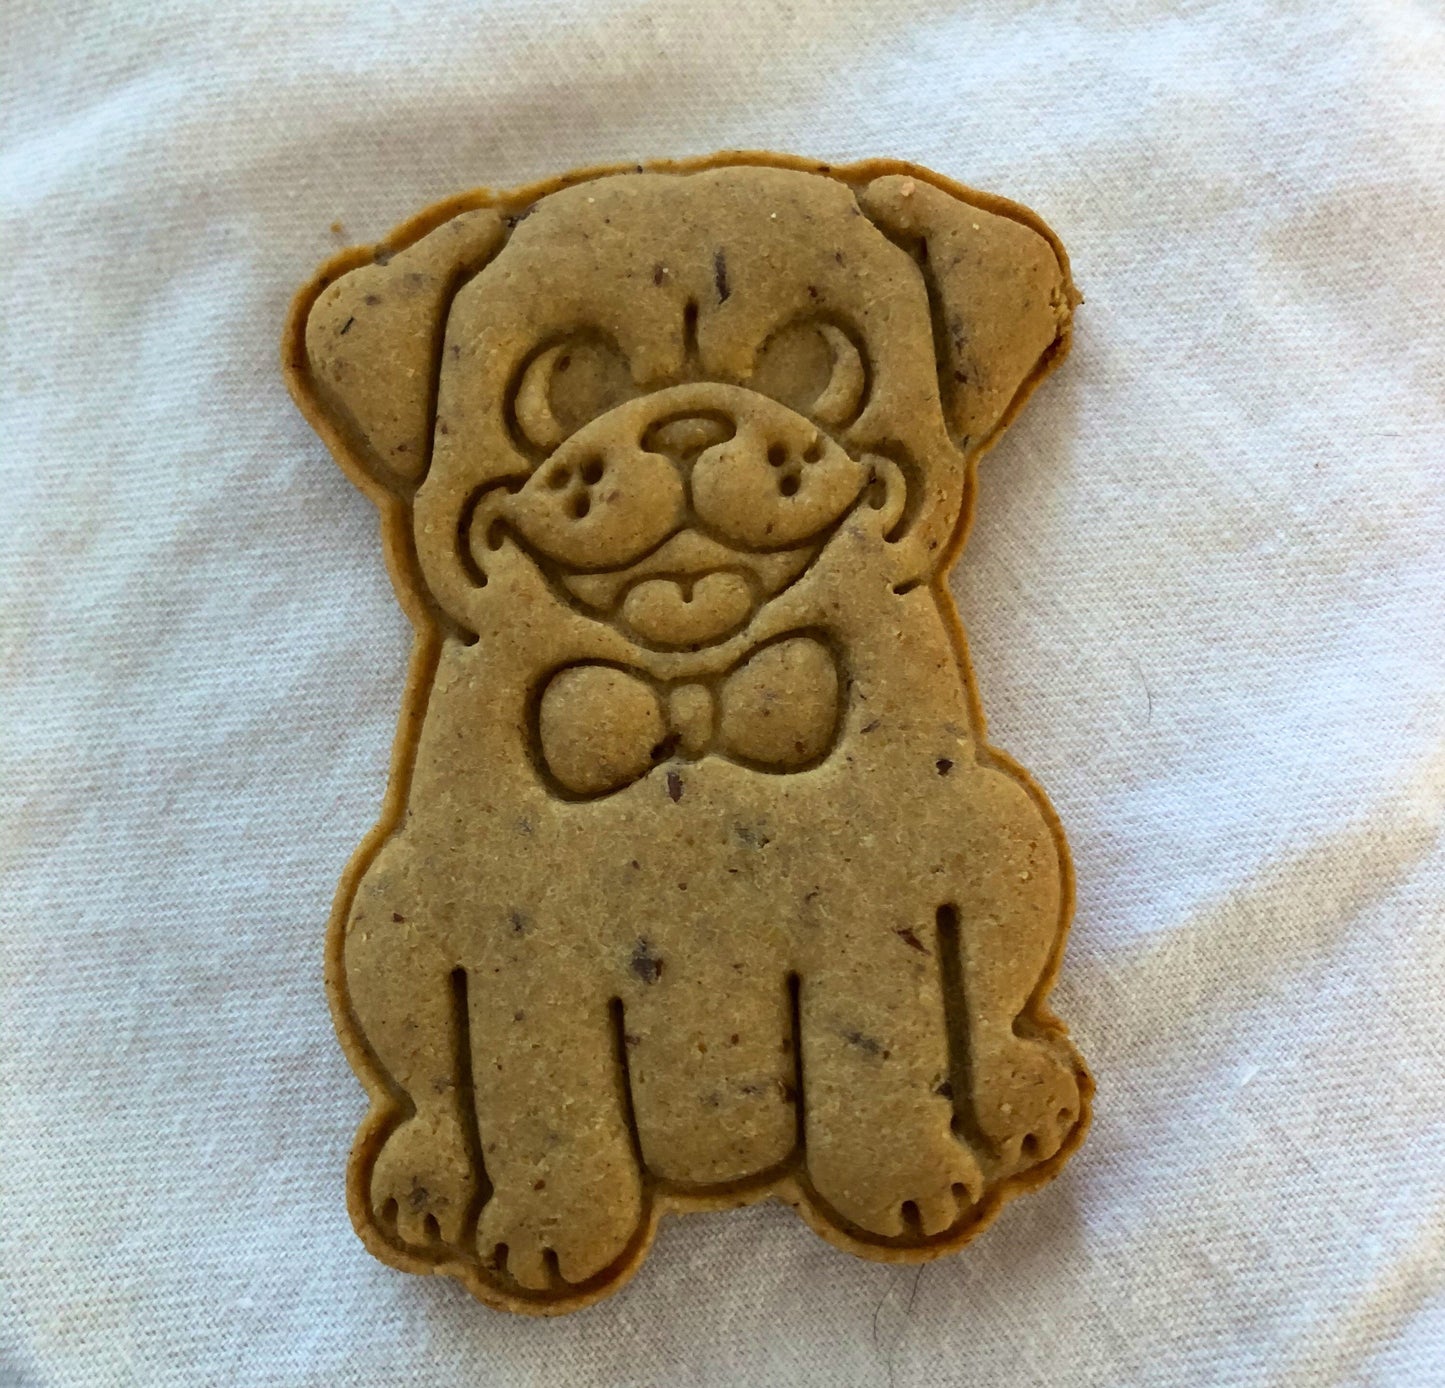 Dog Cookies PB Banana Homemade Limited Ingredient Natural No Wheat, Soy or Corn - A Portion of Proceeds Go To Animal Rescue Groups